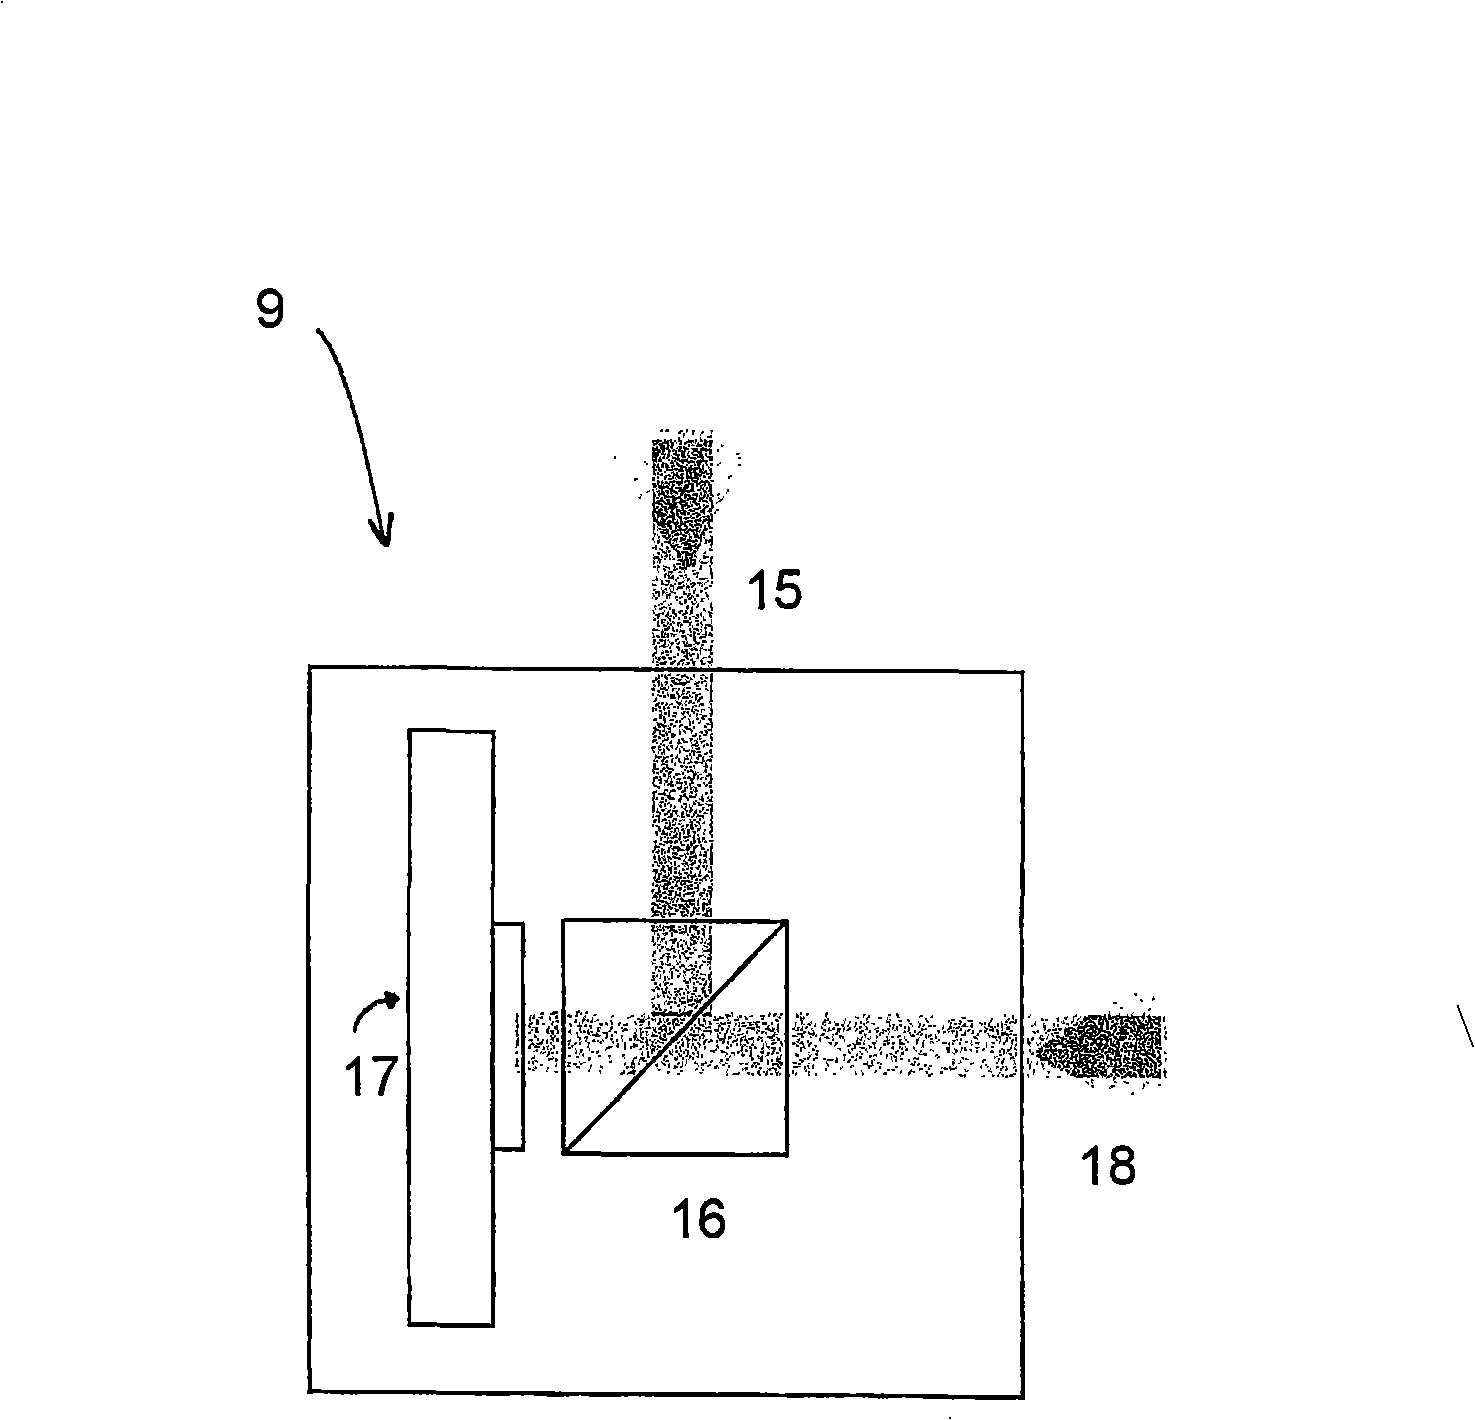 Method and apparatus for analysis of a sample of cells